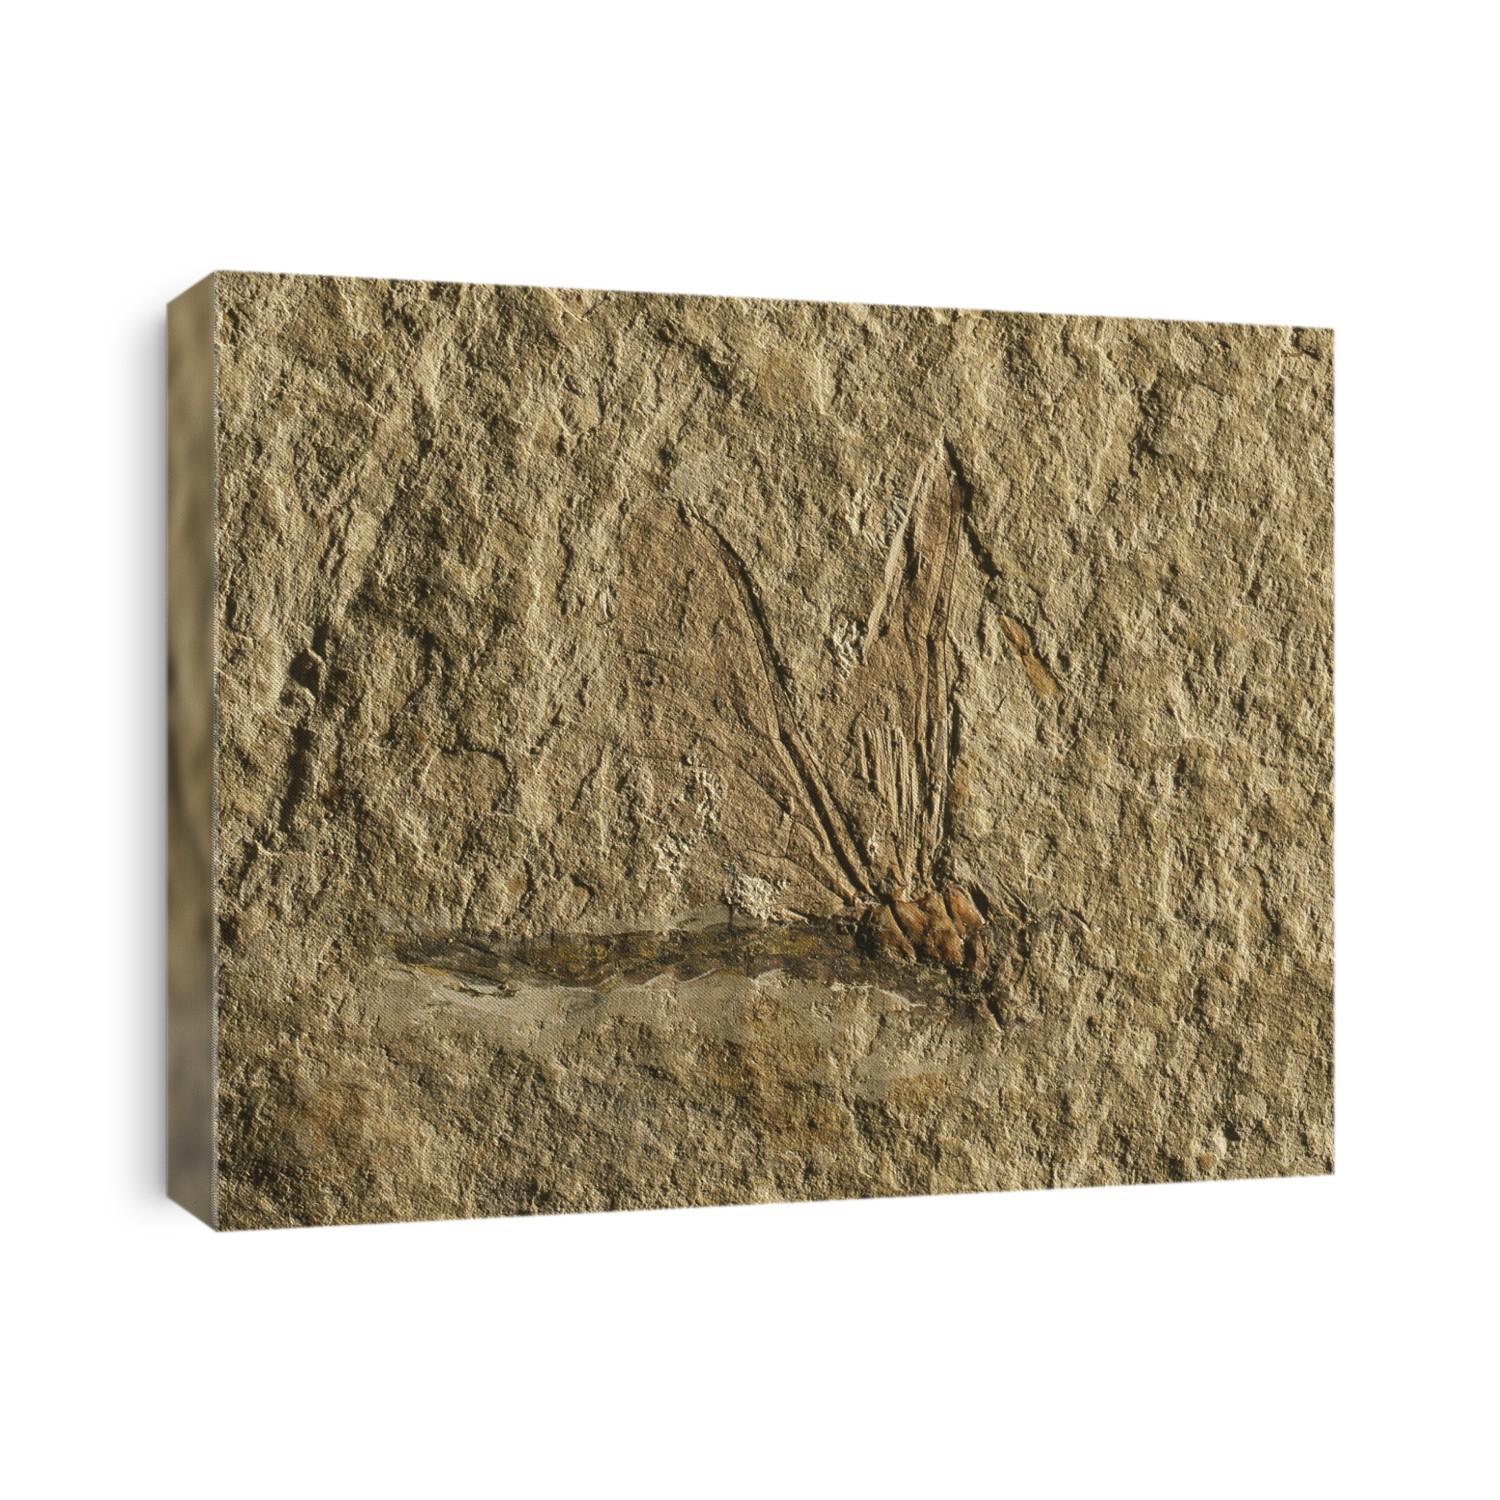 Libelluloidea dragonfly fossil. Fossilised specimen of a Libelluloidea dragonfly. This specimen has a body length of 3 centimetres. It dates from around 130 million years ago, during the Cretaceous, and was found in Liaonning province, China. It is part of the collections of the Entomology department at the National Museum of Natural History (MNHN) in Paris, France.